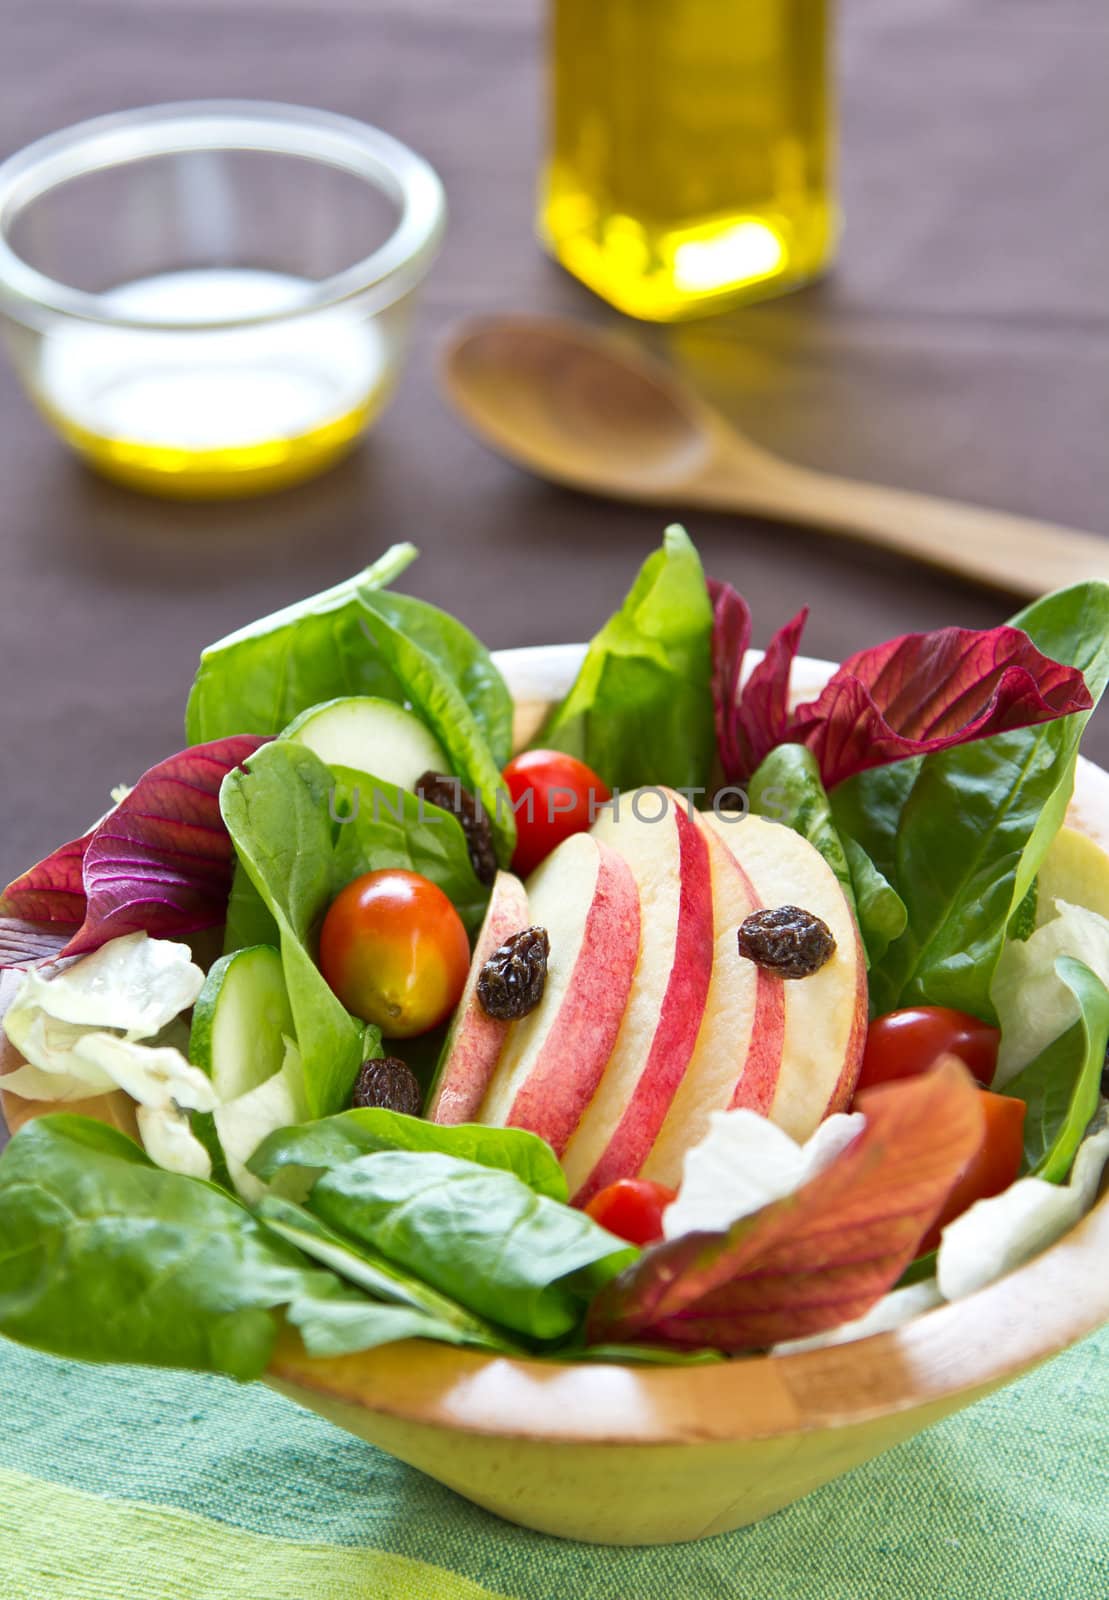 Apple and spinach salad by vanillaechoes